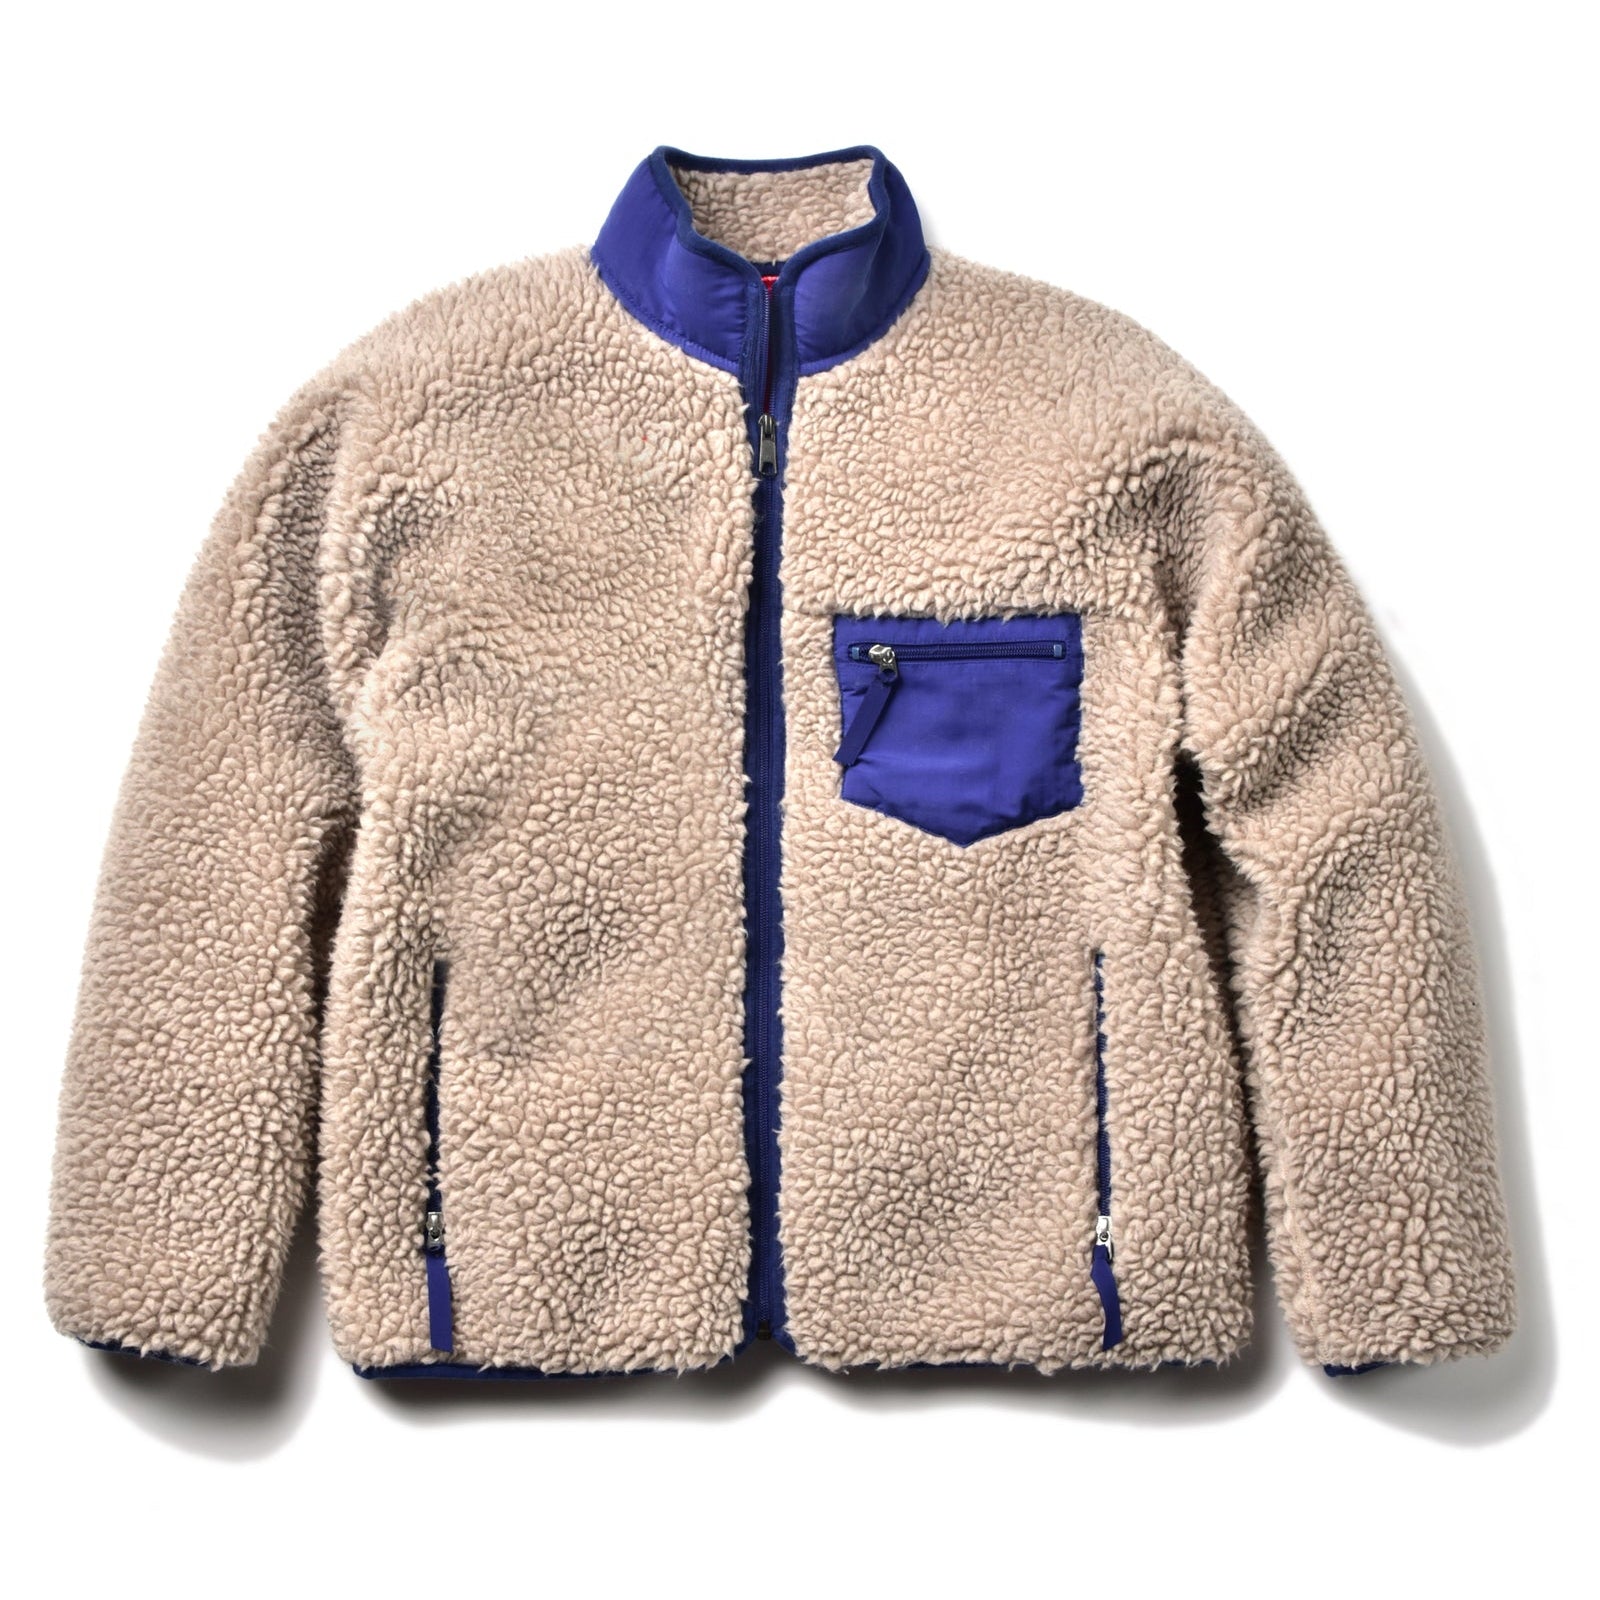 OUTDOOR WOOL PILE JACKET – The Real McCoy's